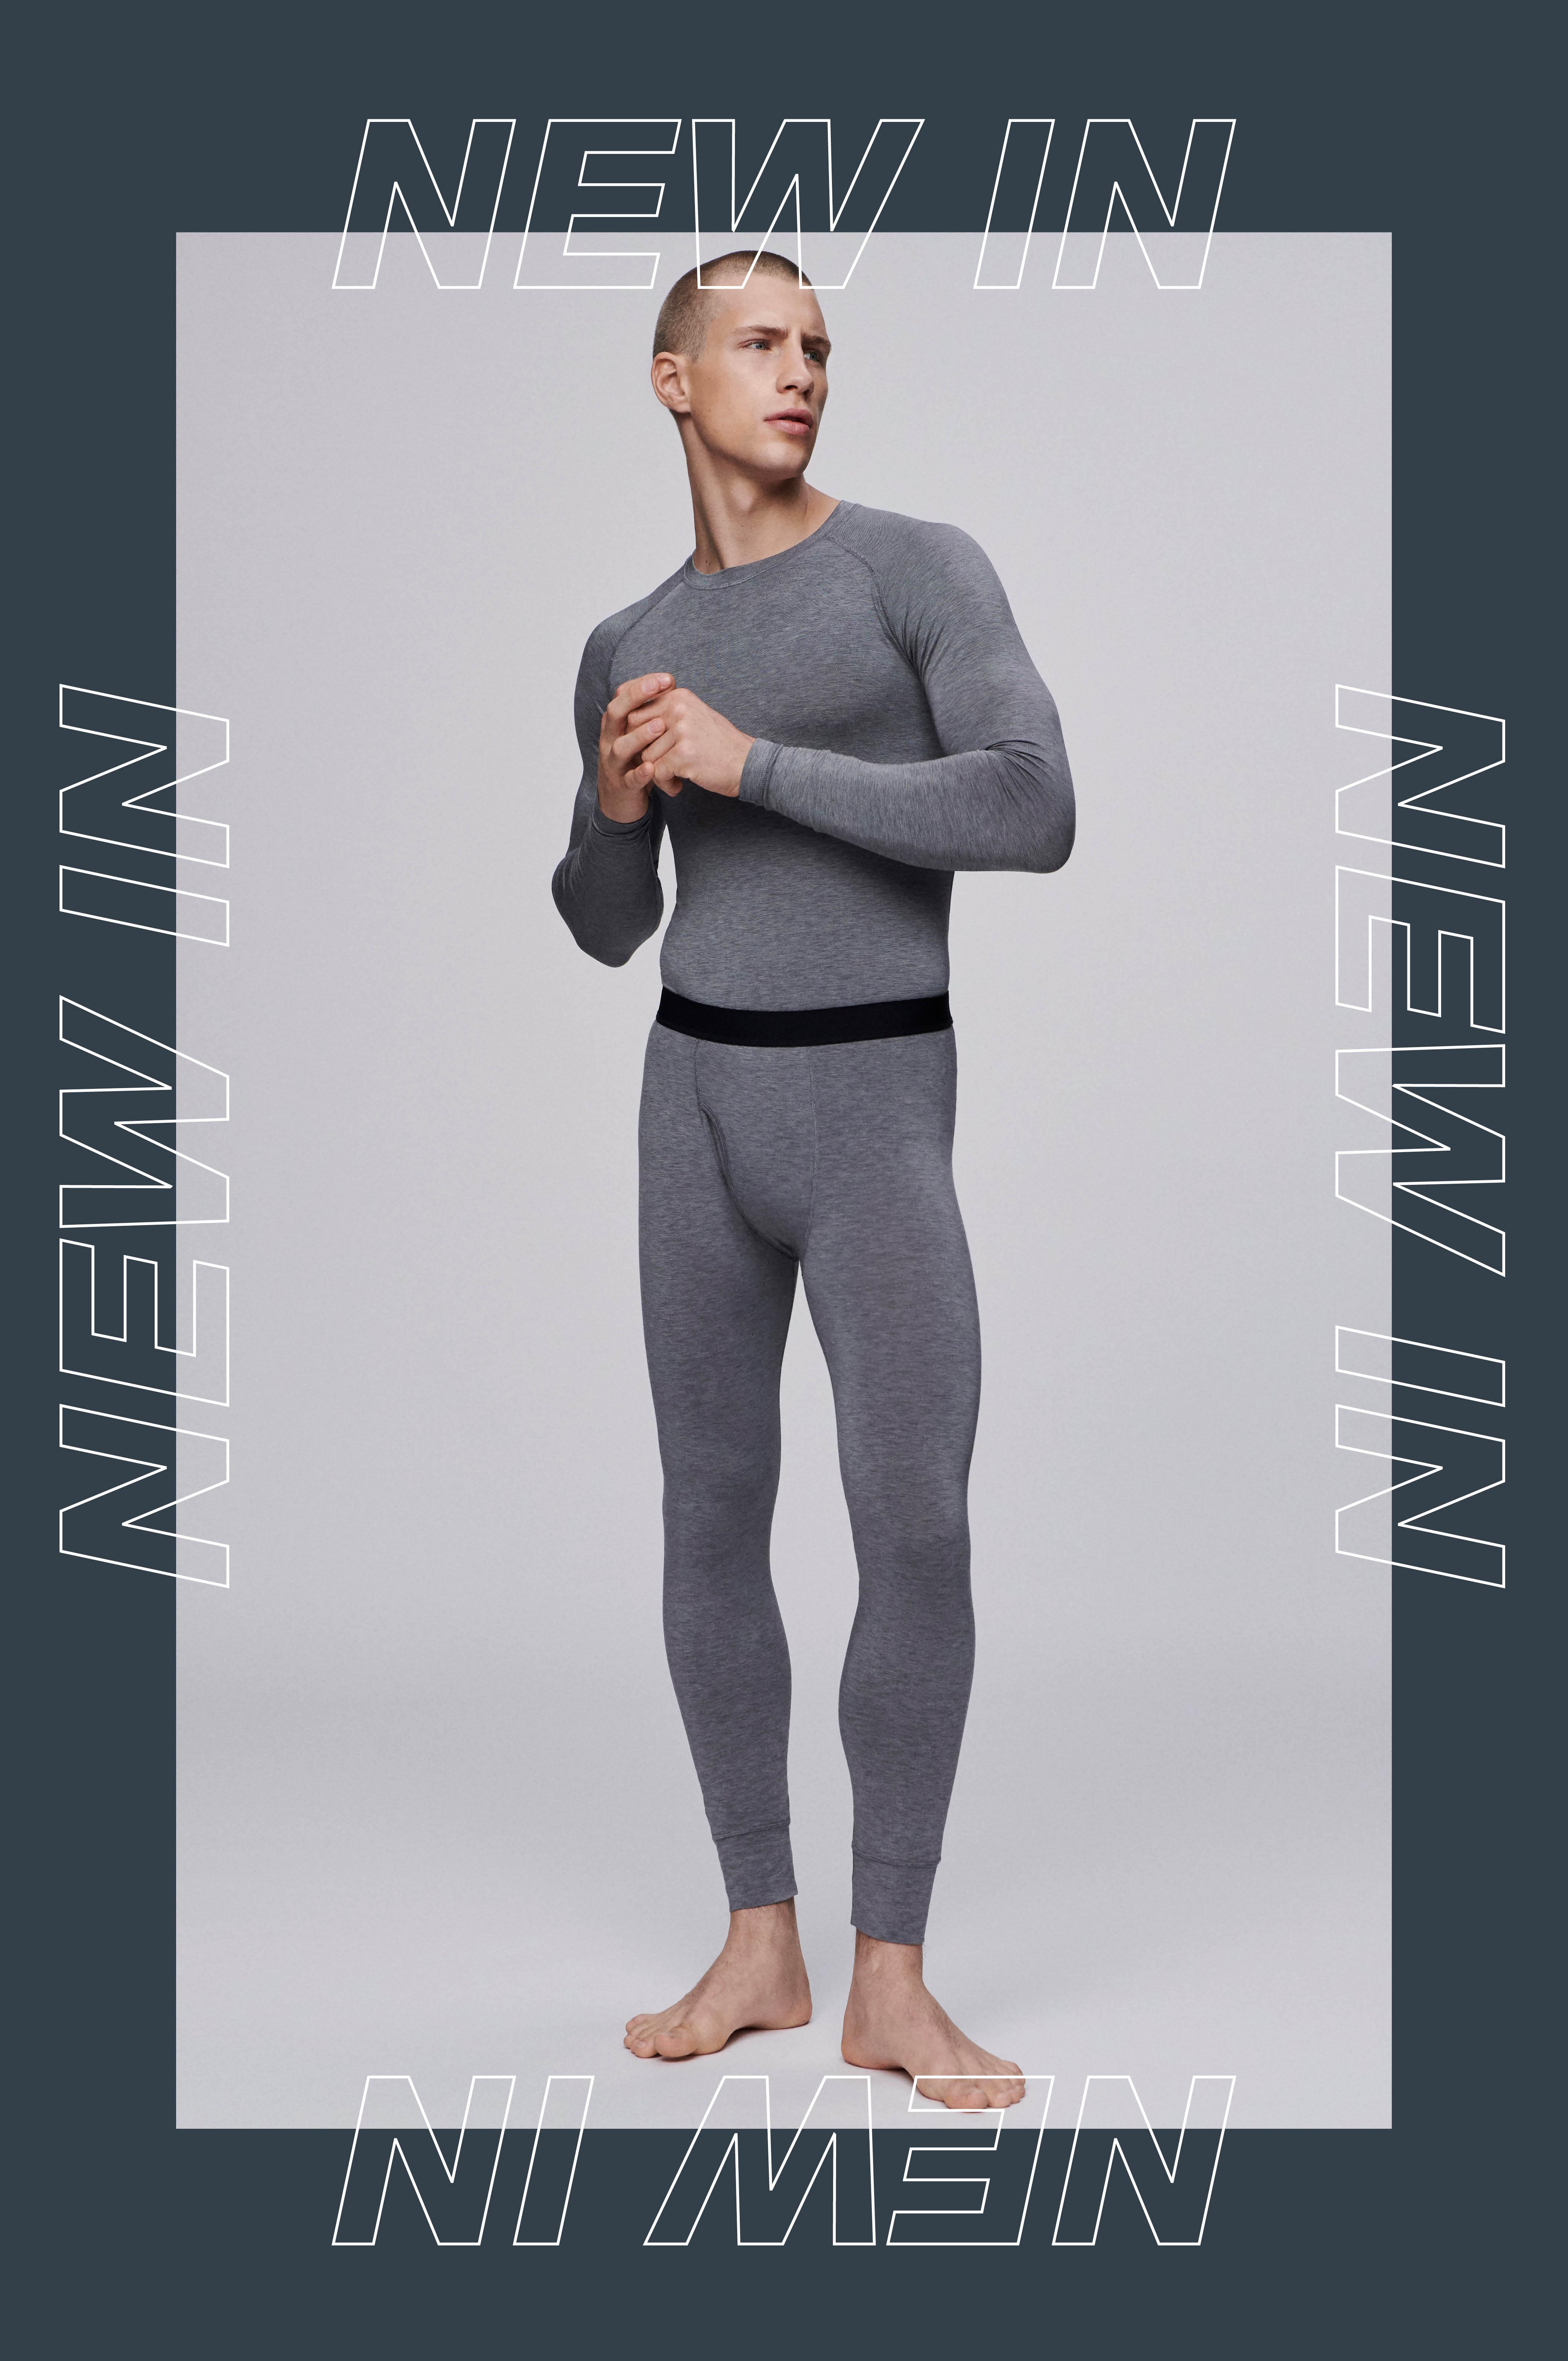 male model in grey thermals